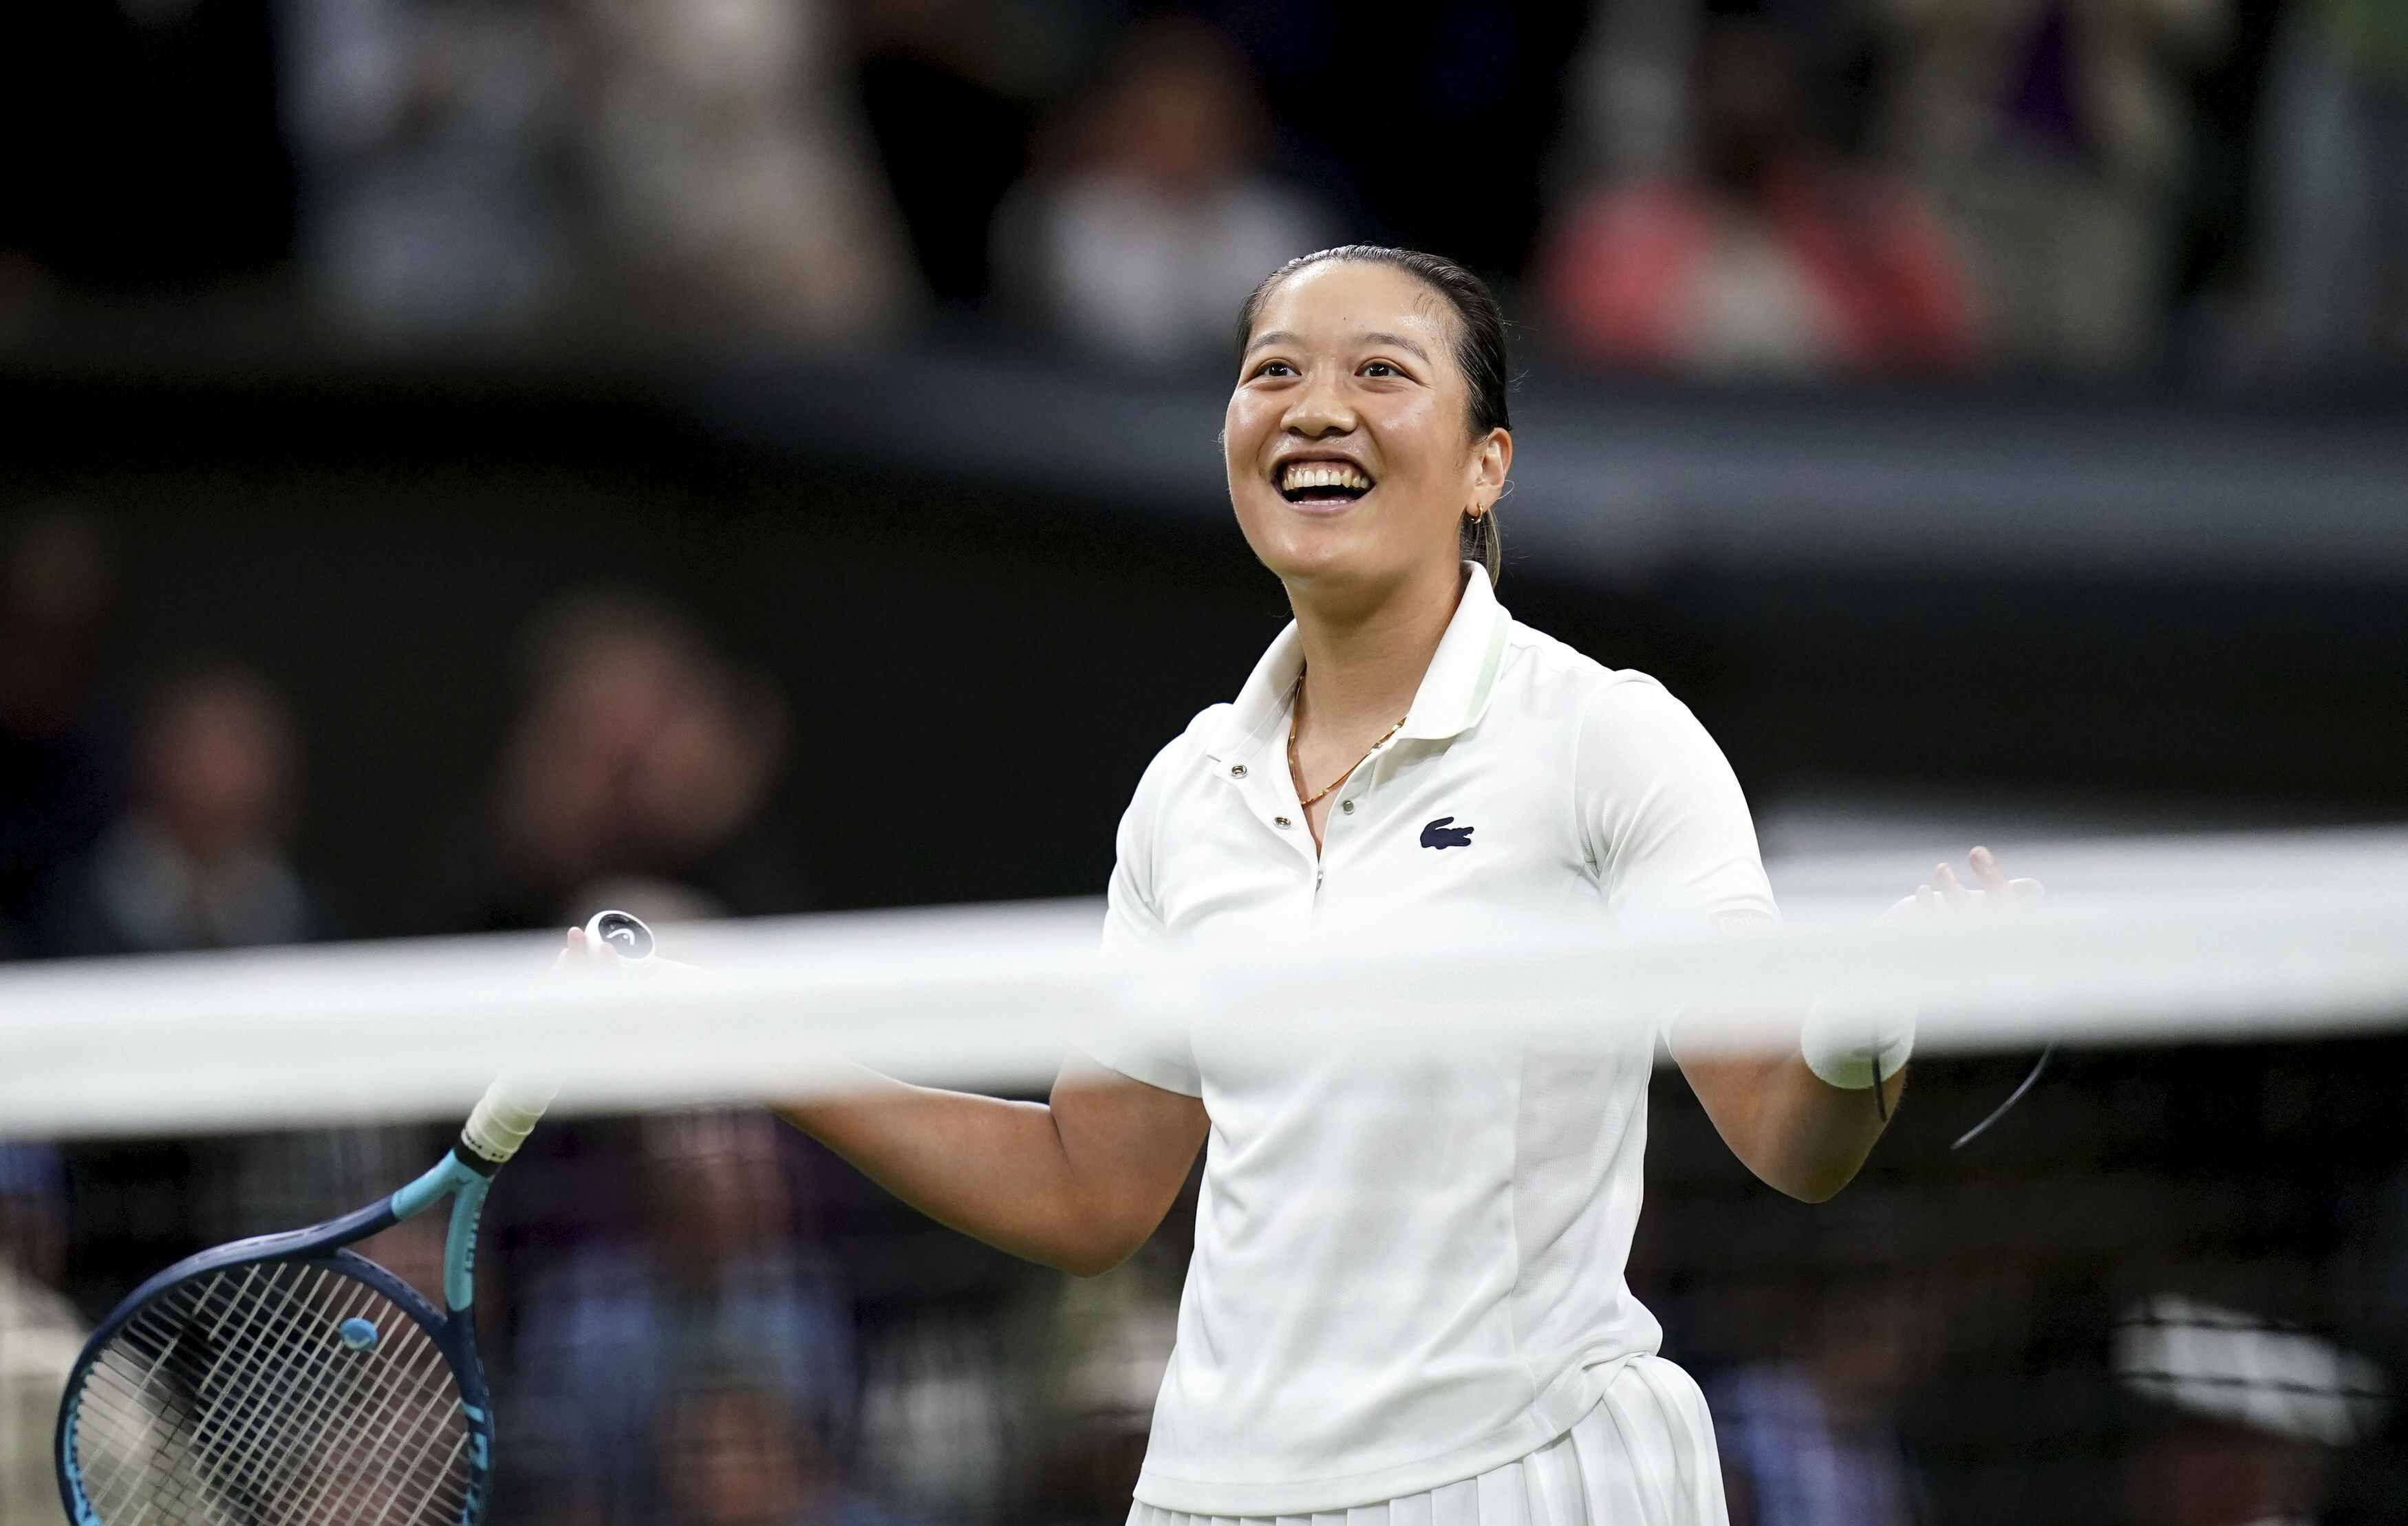 How to watch Wimbledon 2022 Round 3 TV schedule, free live stream for Ugo Humbert, Harmony Tan, more